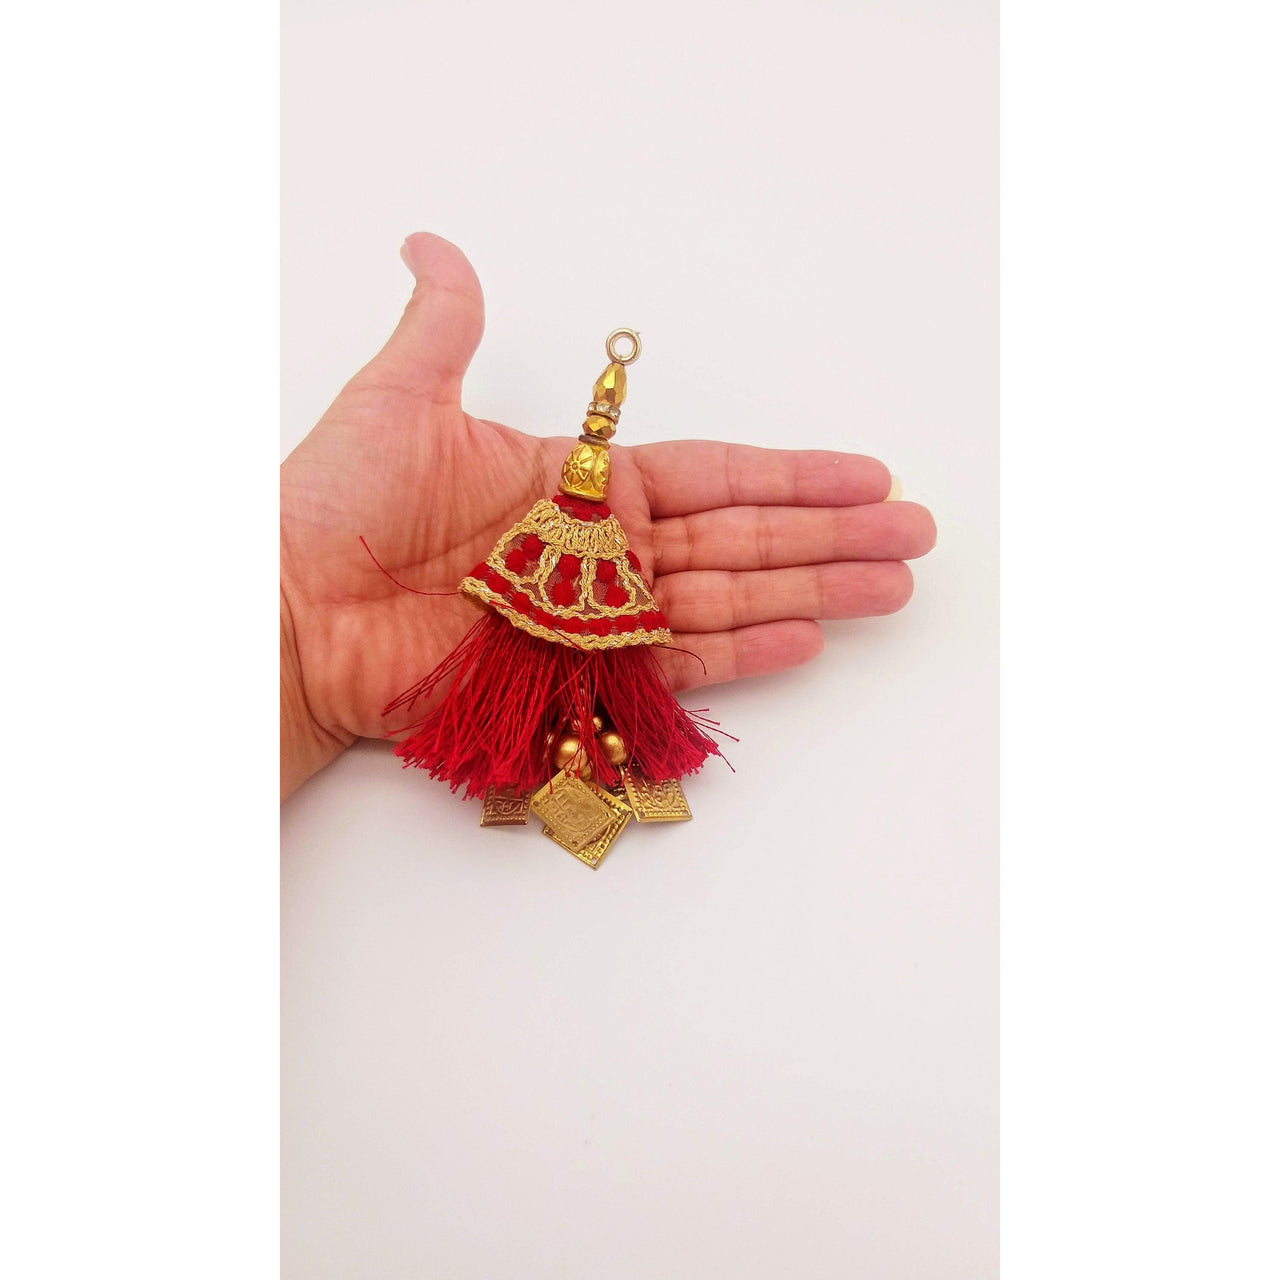 Maroon Tassels With Gold Beads, Beaded Tassels With Maroon and Gold Embroidery, Traditional Indian Latkan